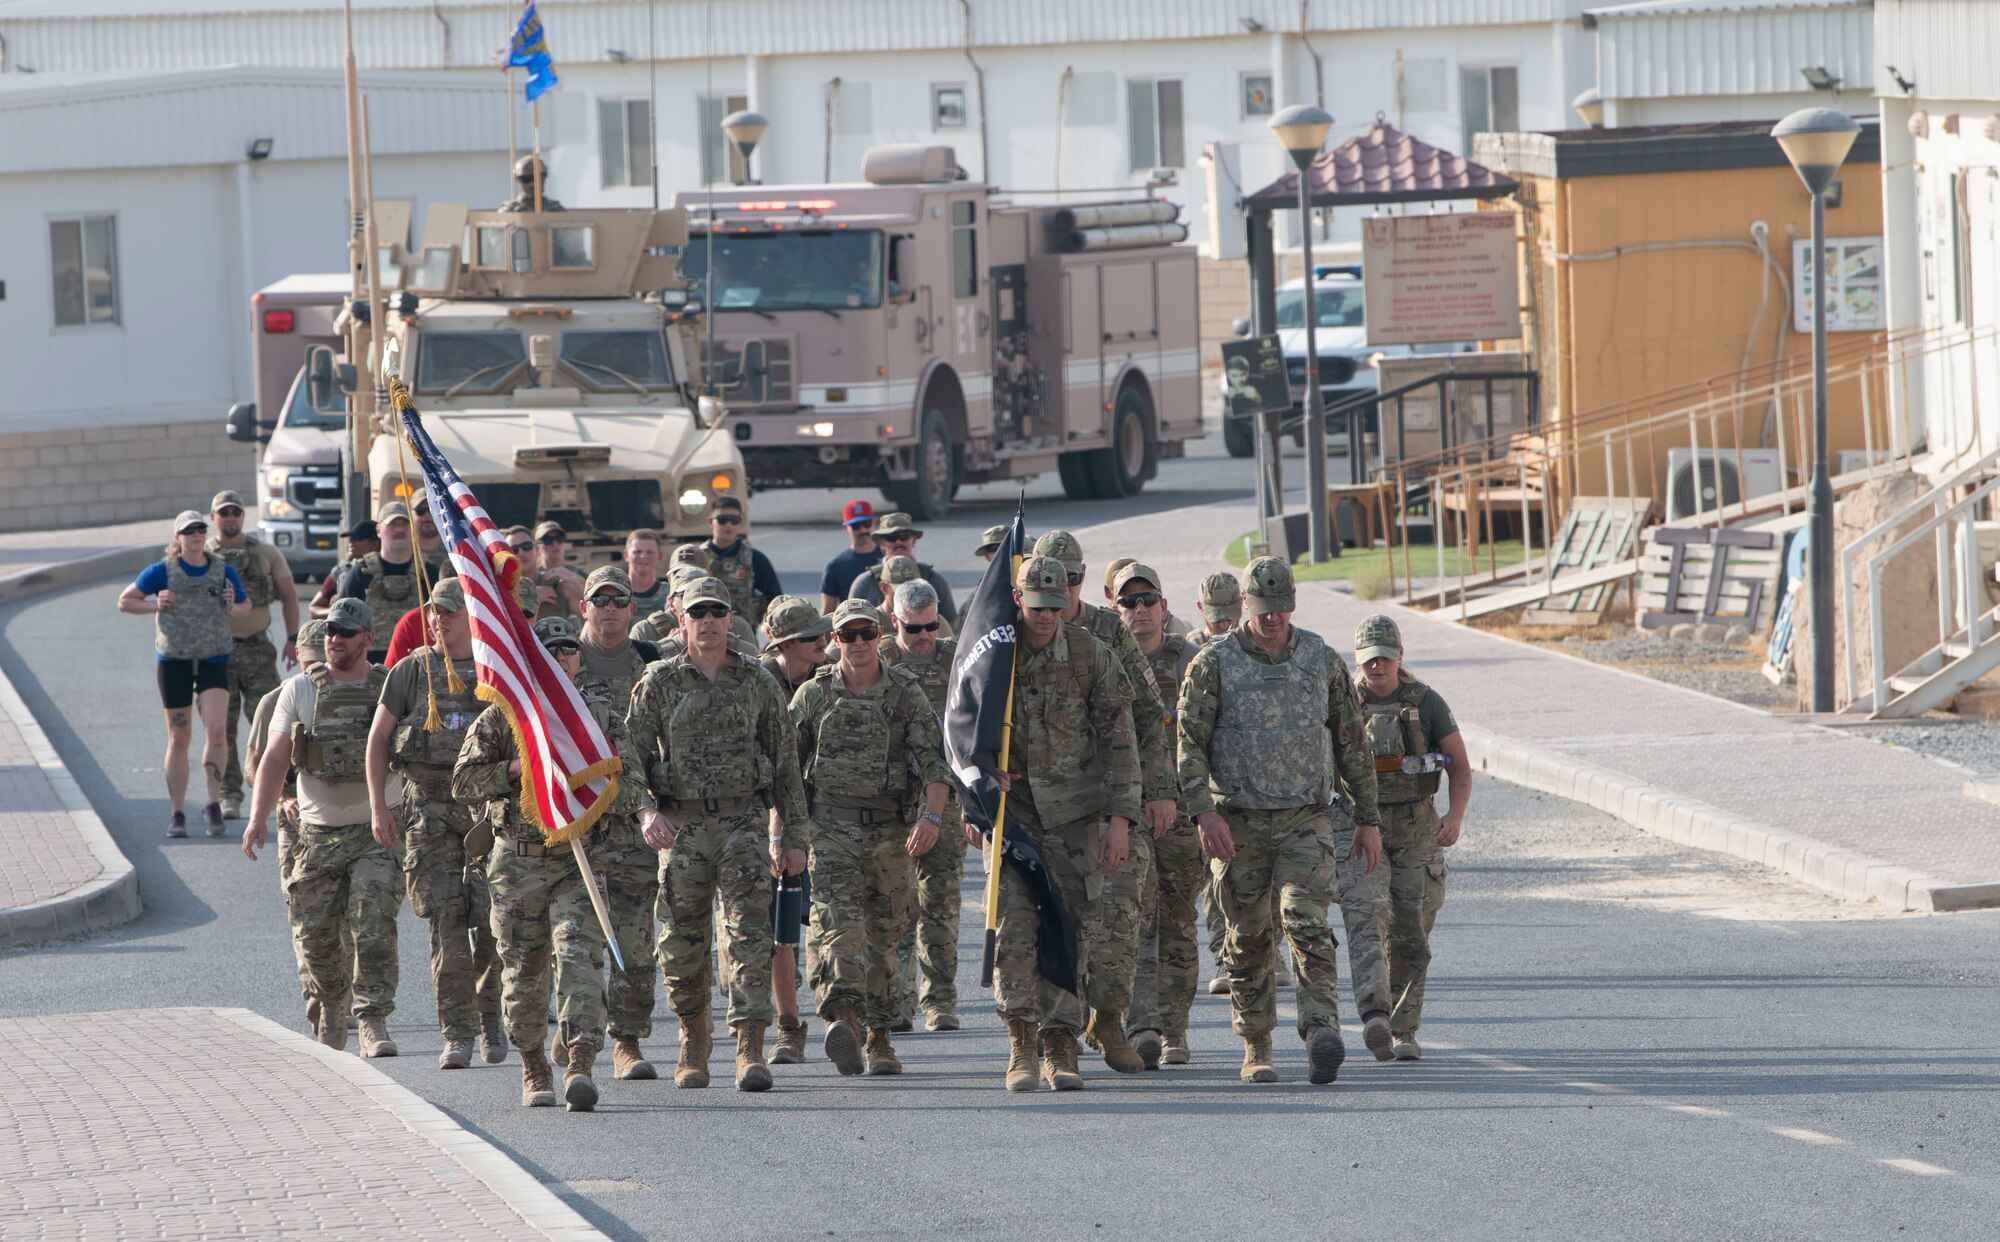 U.S. Airmen along with coalition partners from Ali Al Salem Air Base, Kuwait, finish the first lap of a 24-hour ruck led by Lt. Col. Tito Ruiz, 386th Expeditionary Security Forces Squadron commander, Lt. Col. Sylvester d’Agrella, 386th Expeditionary Civil Engineer Squadron commander, and Lt. Col John Stubbs, 386th Expeditionary Medical Squadron commander along with senior wing leadership, September 11, 2022. “Being here on 9/11 reminds me of why military service is important and reminds our adversaries of American resolve—if they hurt us we will work with our Allies and bring combat power upon them—that is deterrence…that is Coalition military power.” (U.S. Air Force photo by Staff Sgt. Ashley N. Mikaio)